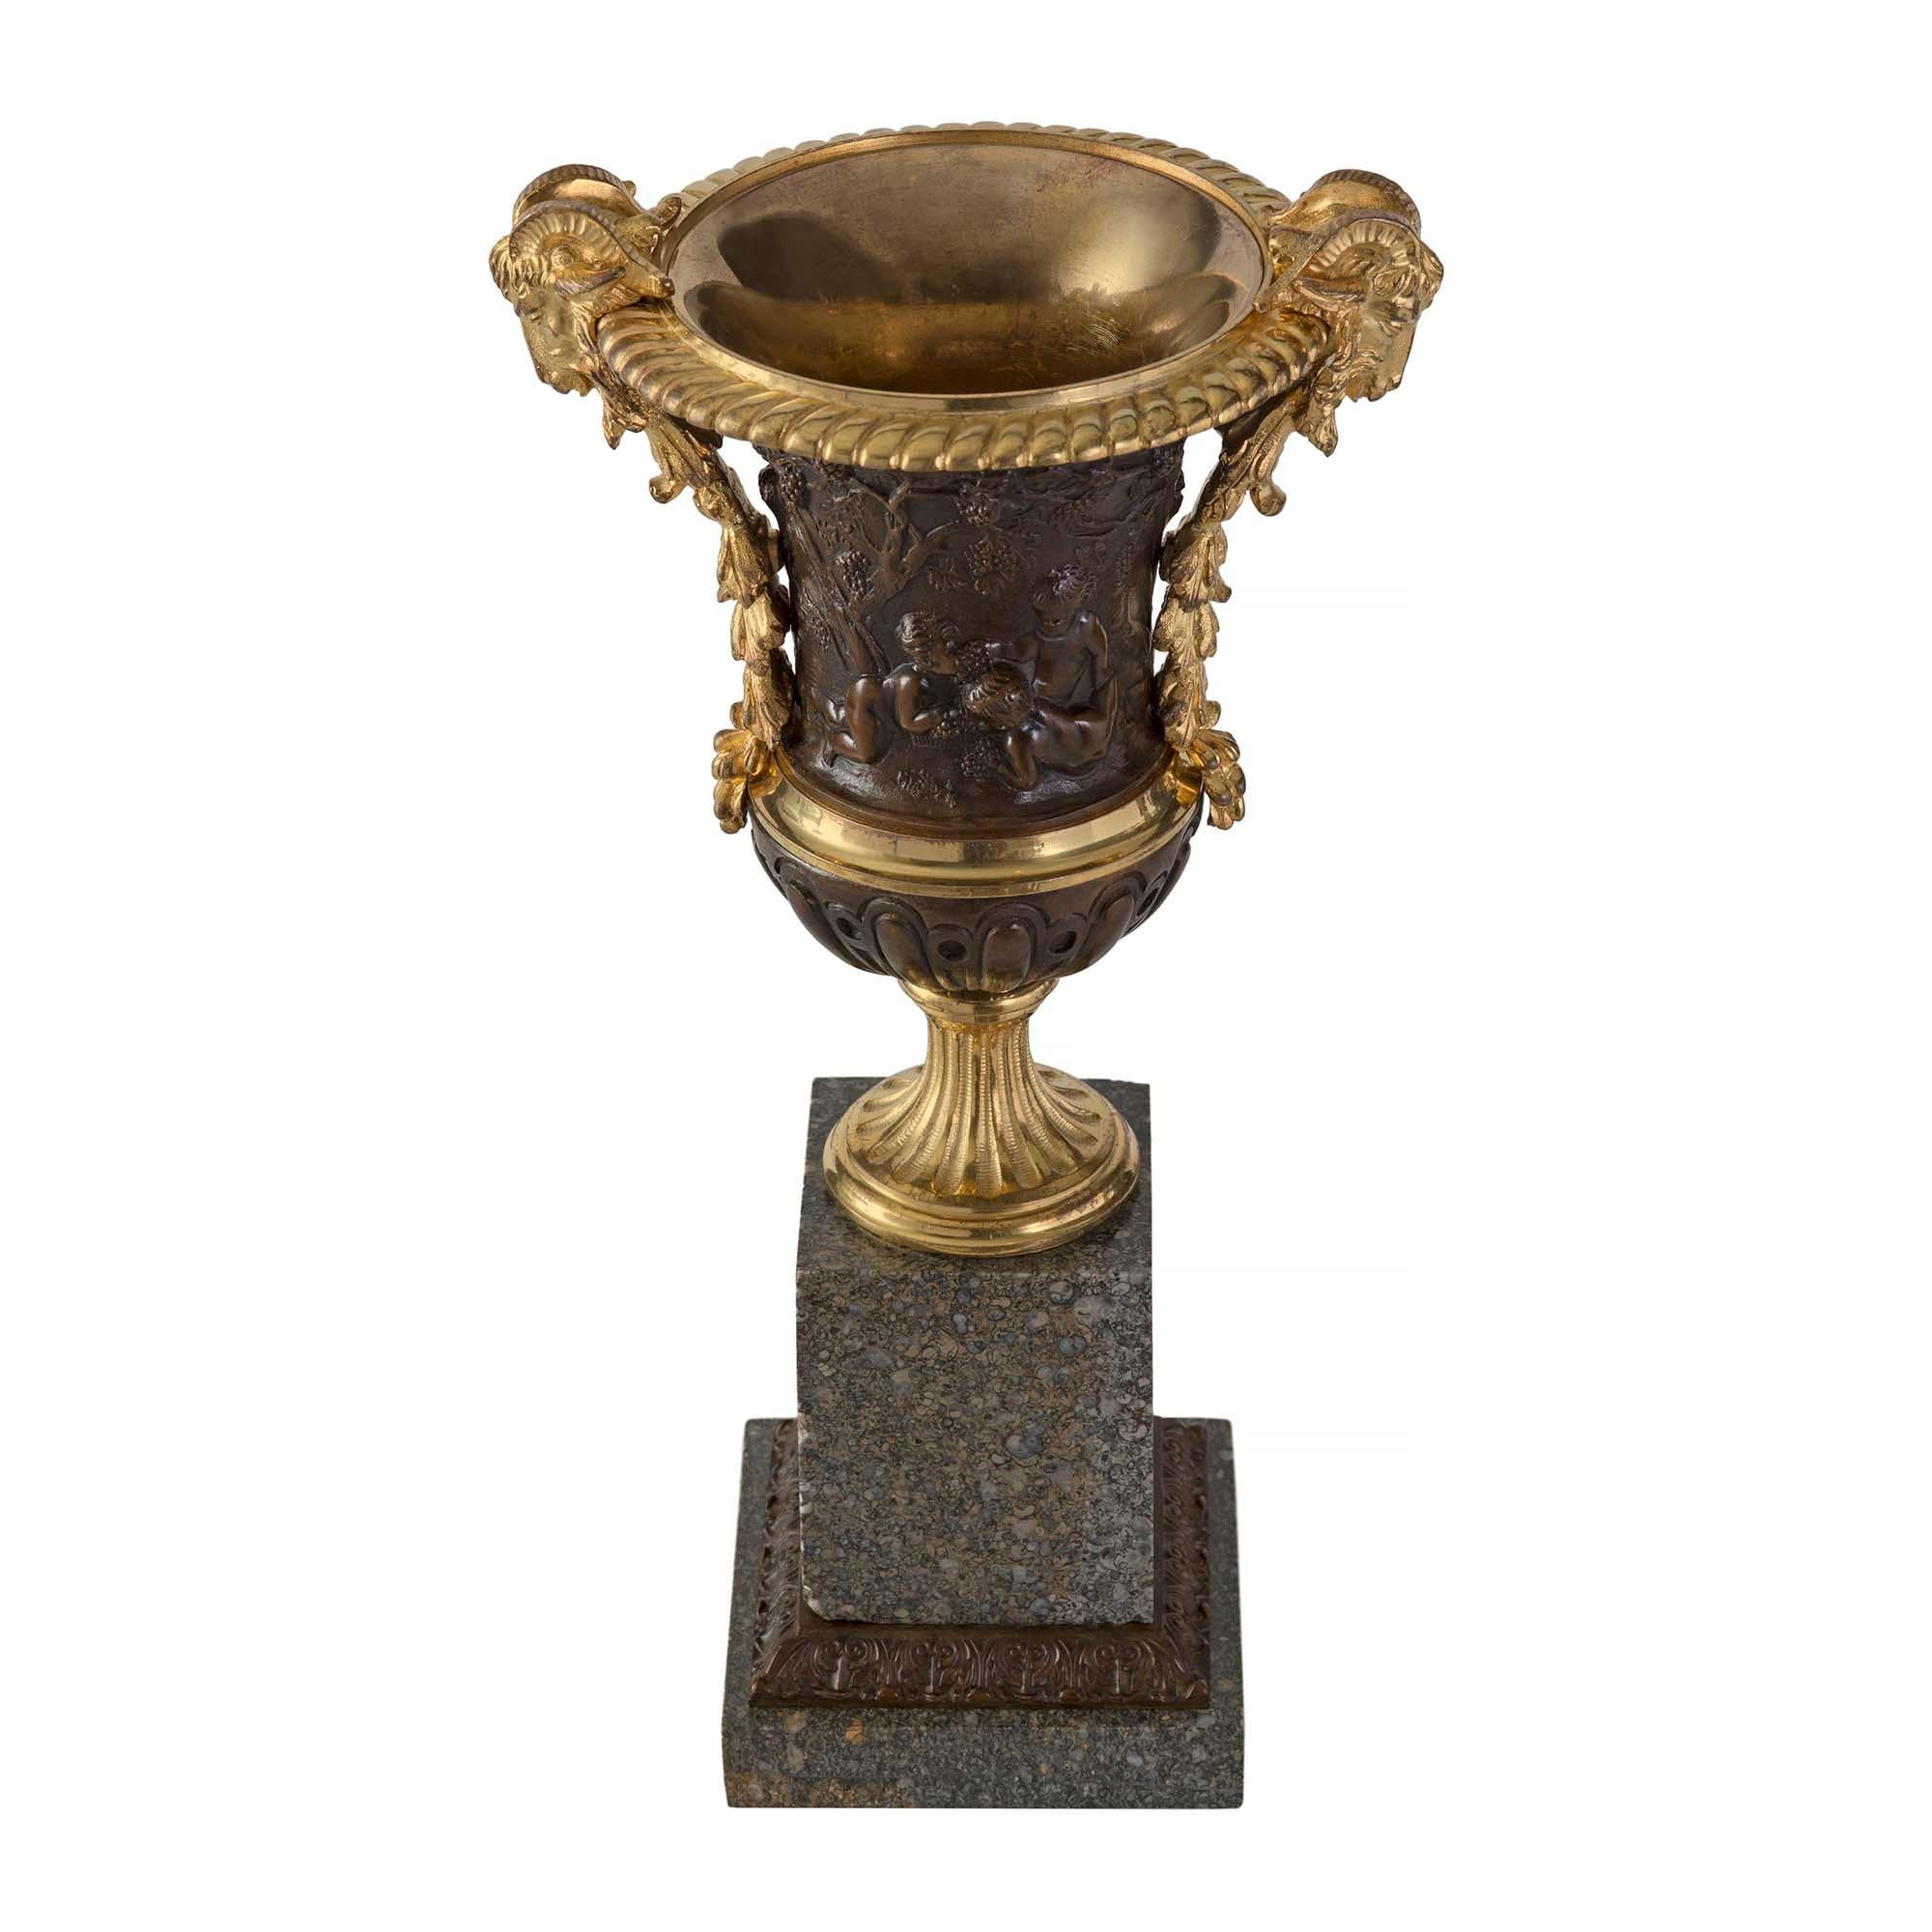 A striking pair of French 19th century Louis XVI st. ormolu, patinated bronze and granite urns. Each urn is raised by a square granite base with a foliate wrap around patinated bronze band. The circular fluted socle pedestal displays a most